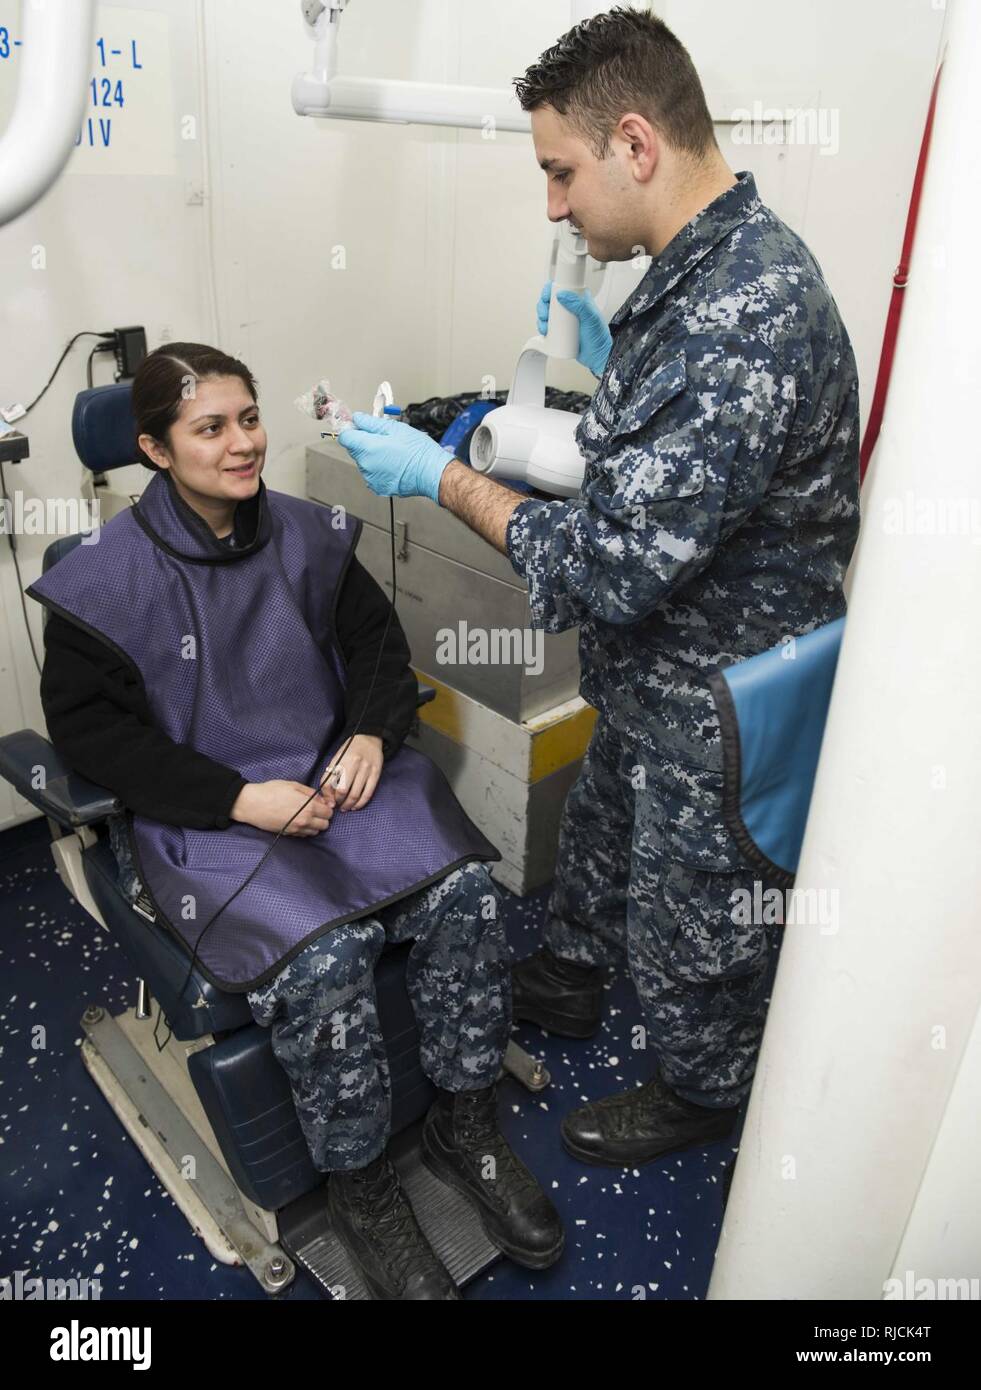 PORTSMOUTH, Va. (Jan. 11, 2018) Hospitalman Dustin Garner, right, prepares Aviation Structural Mechanic Airman Jaquelin Ramirez for an X-ray aboard the aircraft carrier USS Dwight D. Eisenhower (CVN 69). Eisenhower is undergoing a Planned Incremental Availability (PIA) at Norfolk Naval Shipyard during the maintenance phase of the Optimized Fleet Response Plan (OFRP). Stock Photo